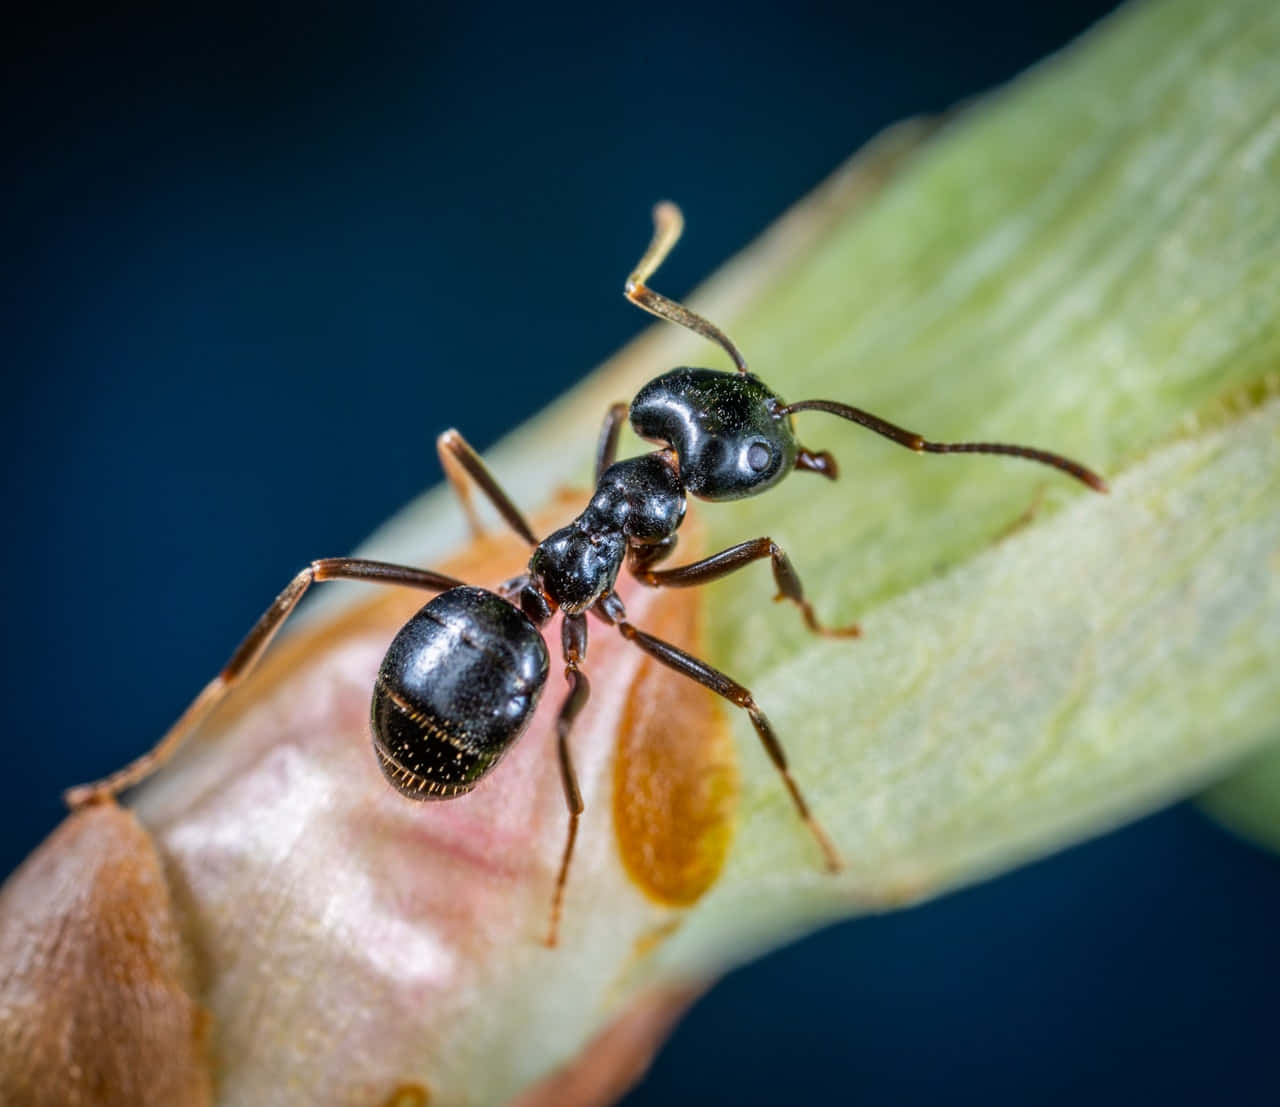 An Ant Exploring Its Surroundings